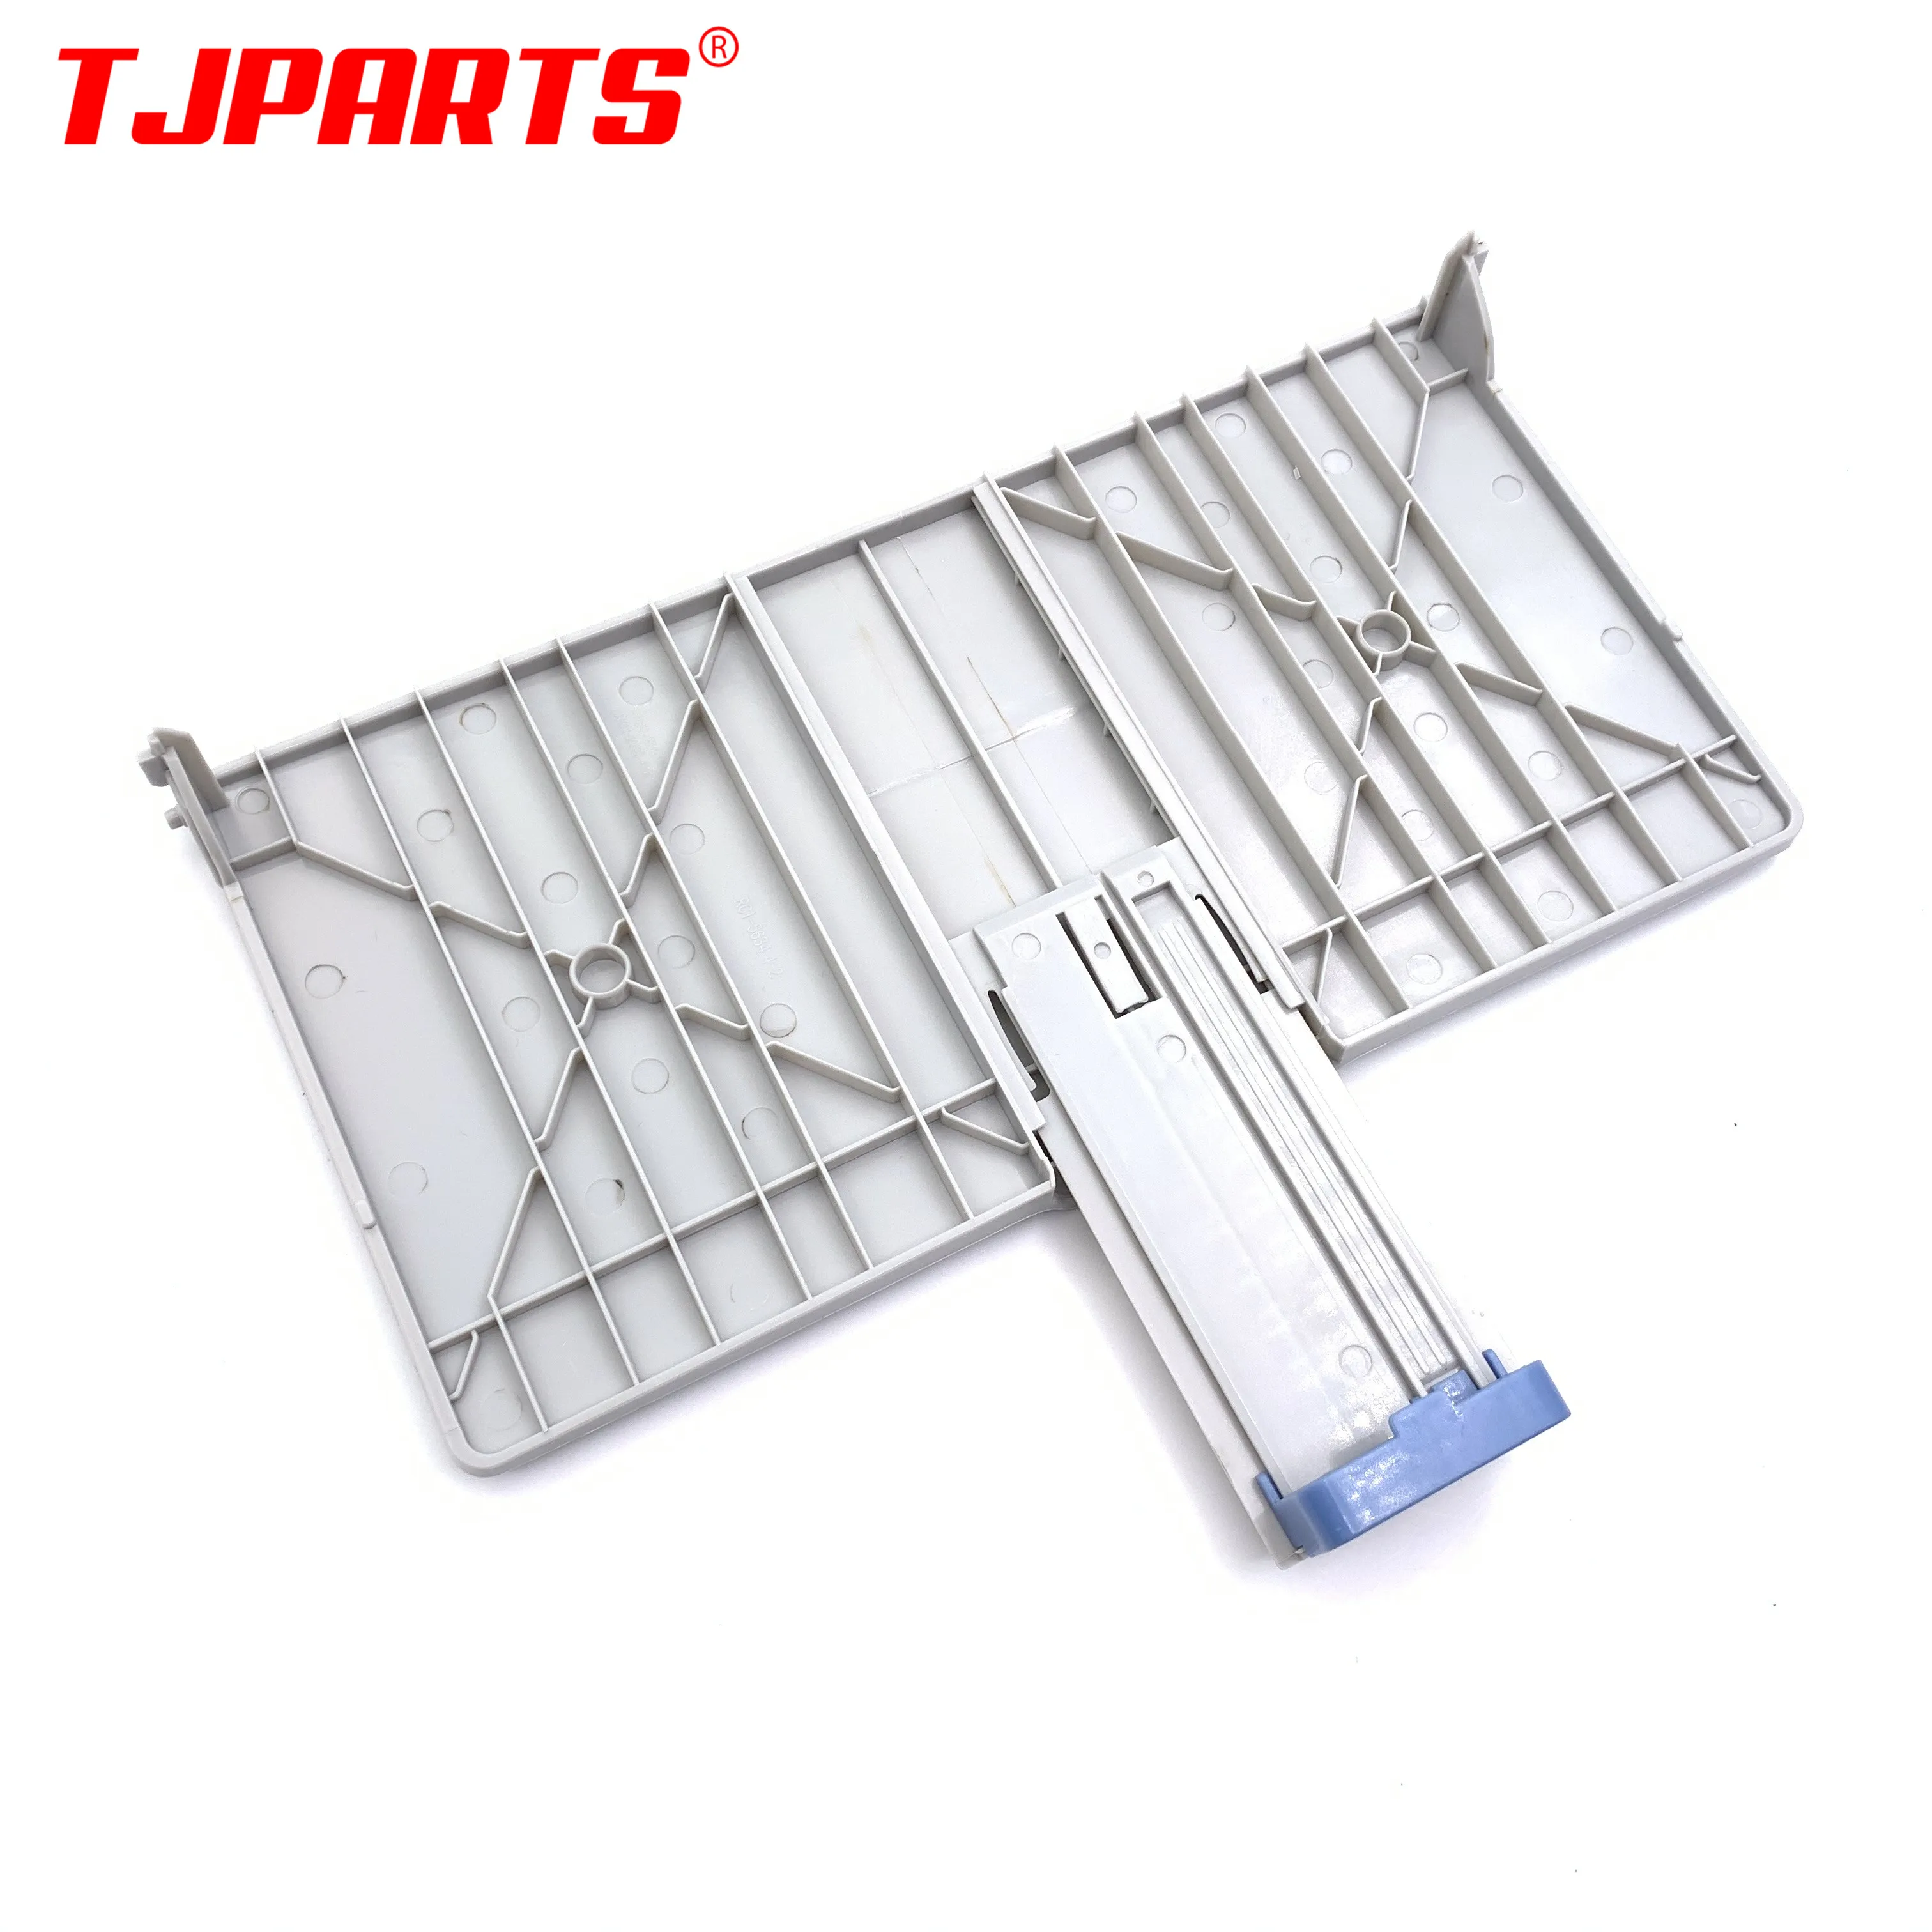 1PC X RM1-0629-000CN Paper Input Tray Assembly PAPER PICKUP TRAY ASS'Y for HP LaserJet 1010 1012 1015 1018 1020 image_0